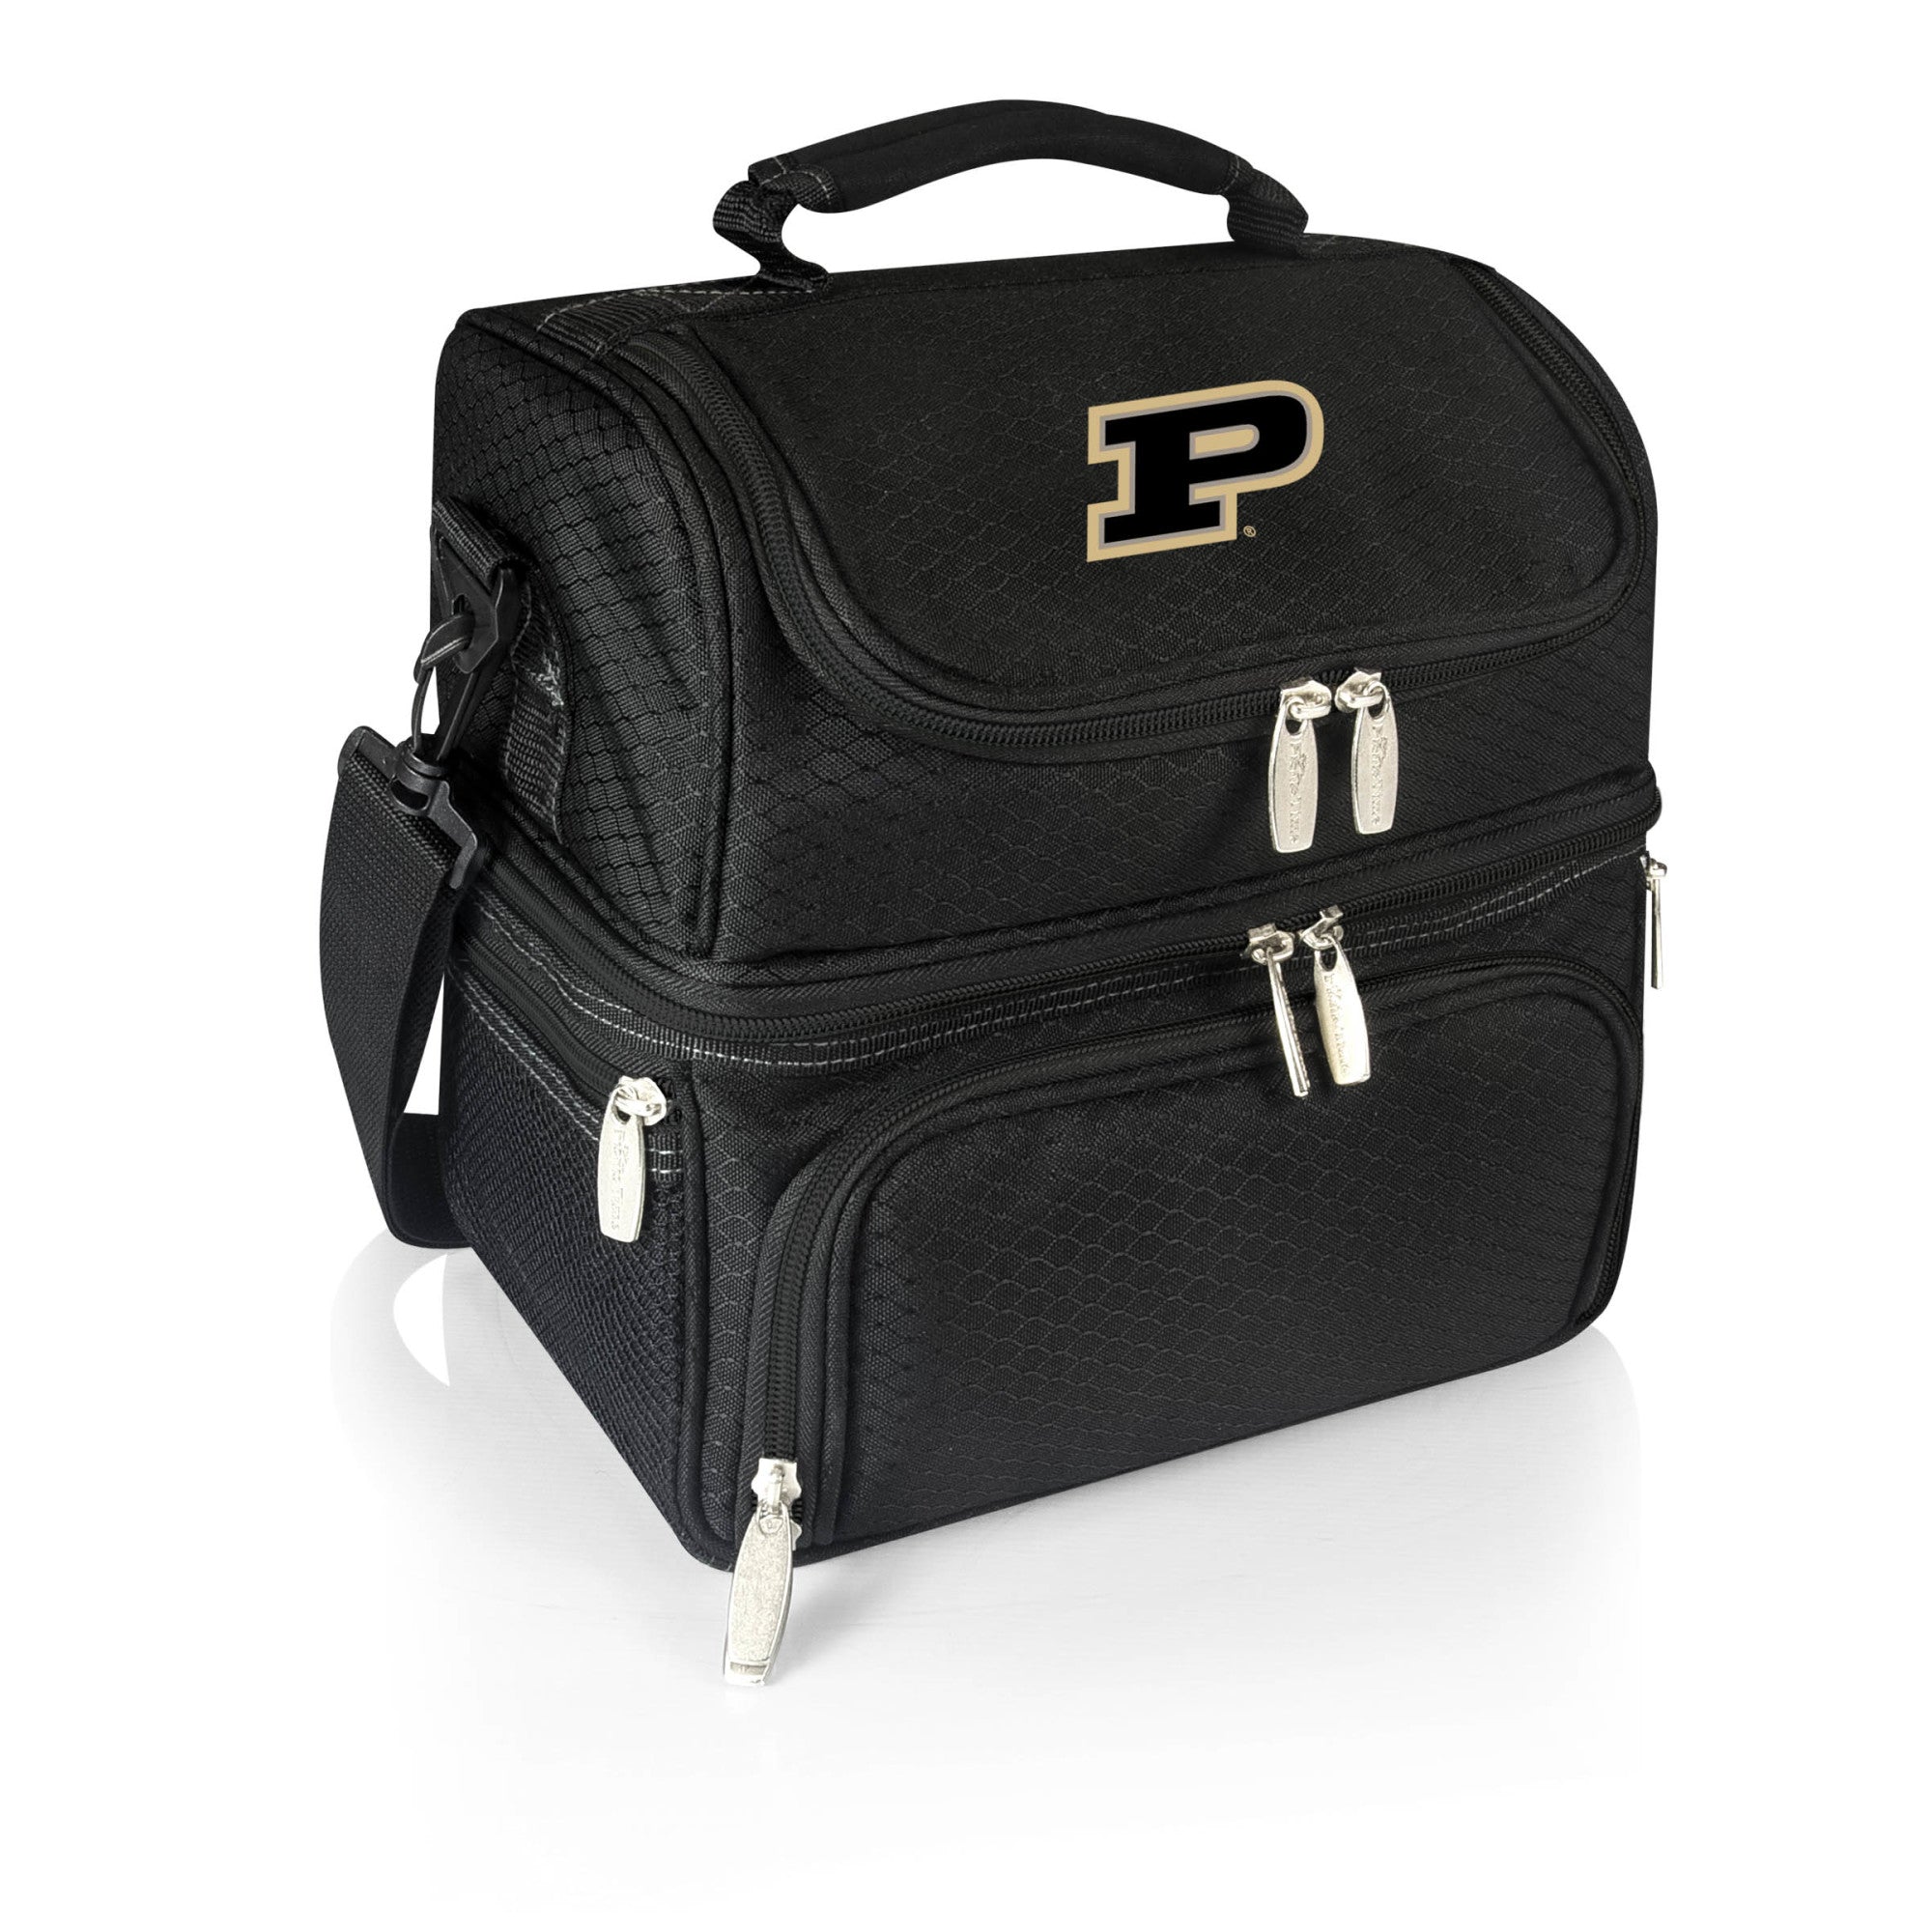 Purdue Boilermakers - Pranzo Lunch Bag Cooler with Utensils